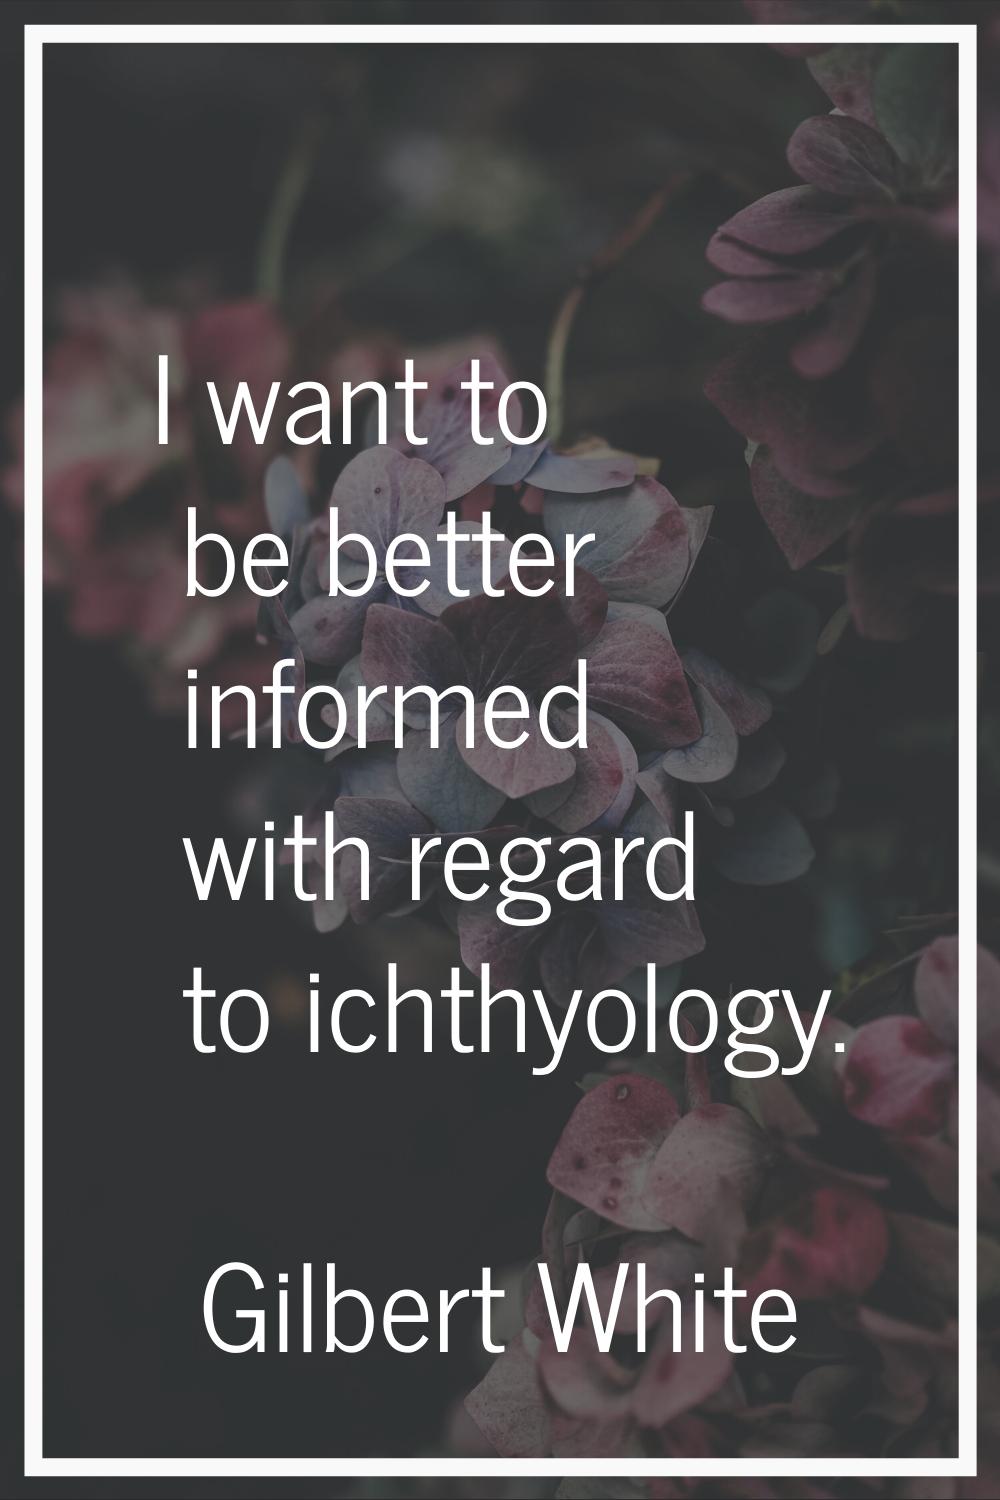 I want to be better informed with regard to ichthyology.